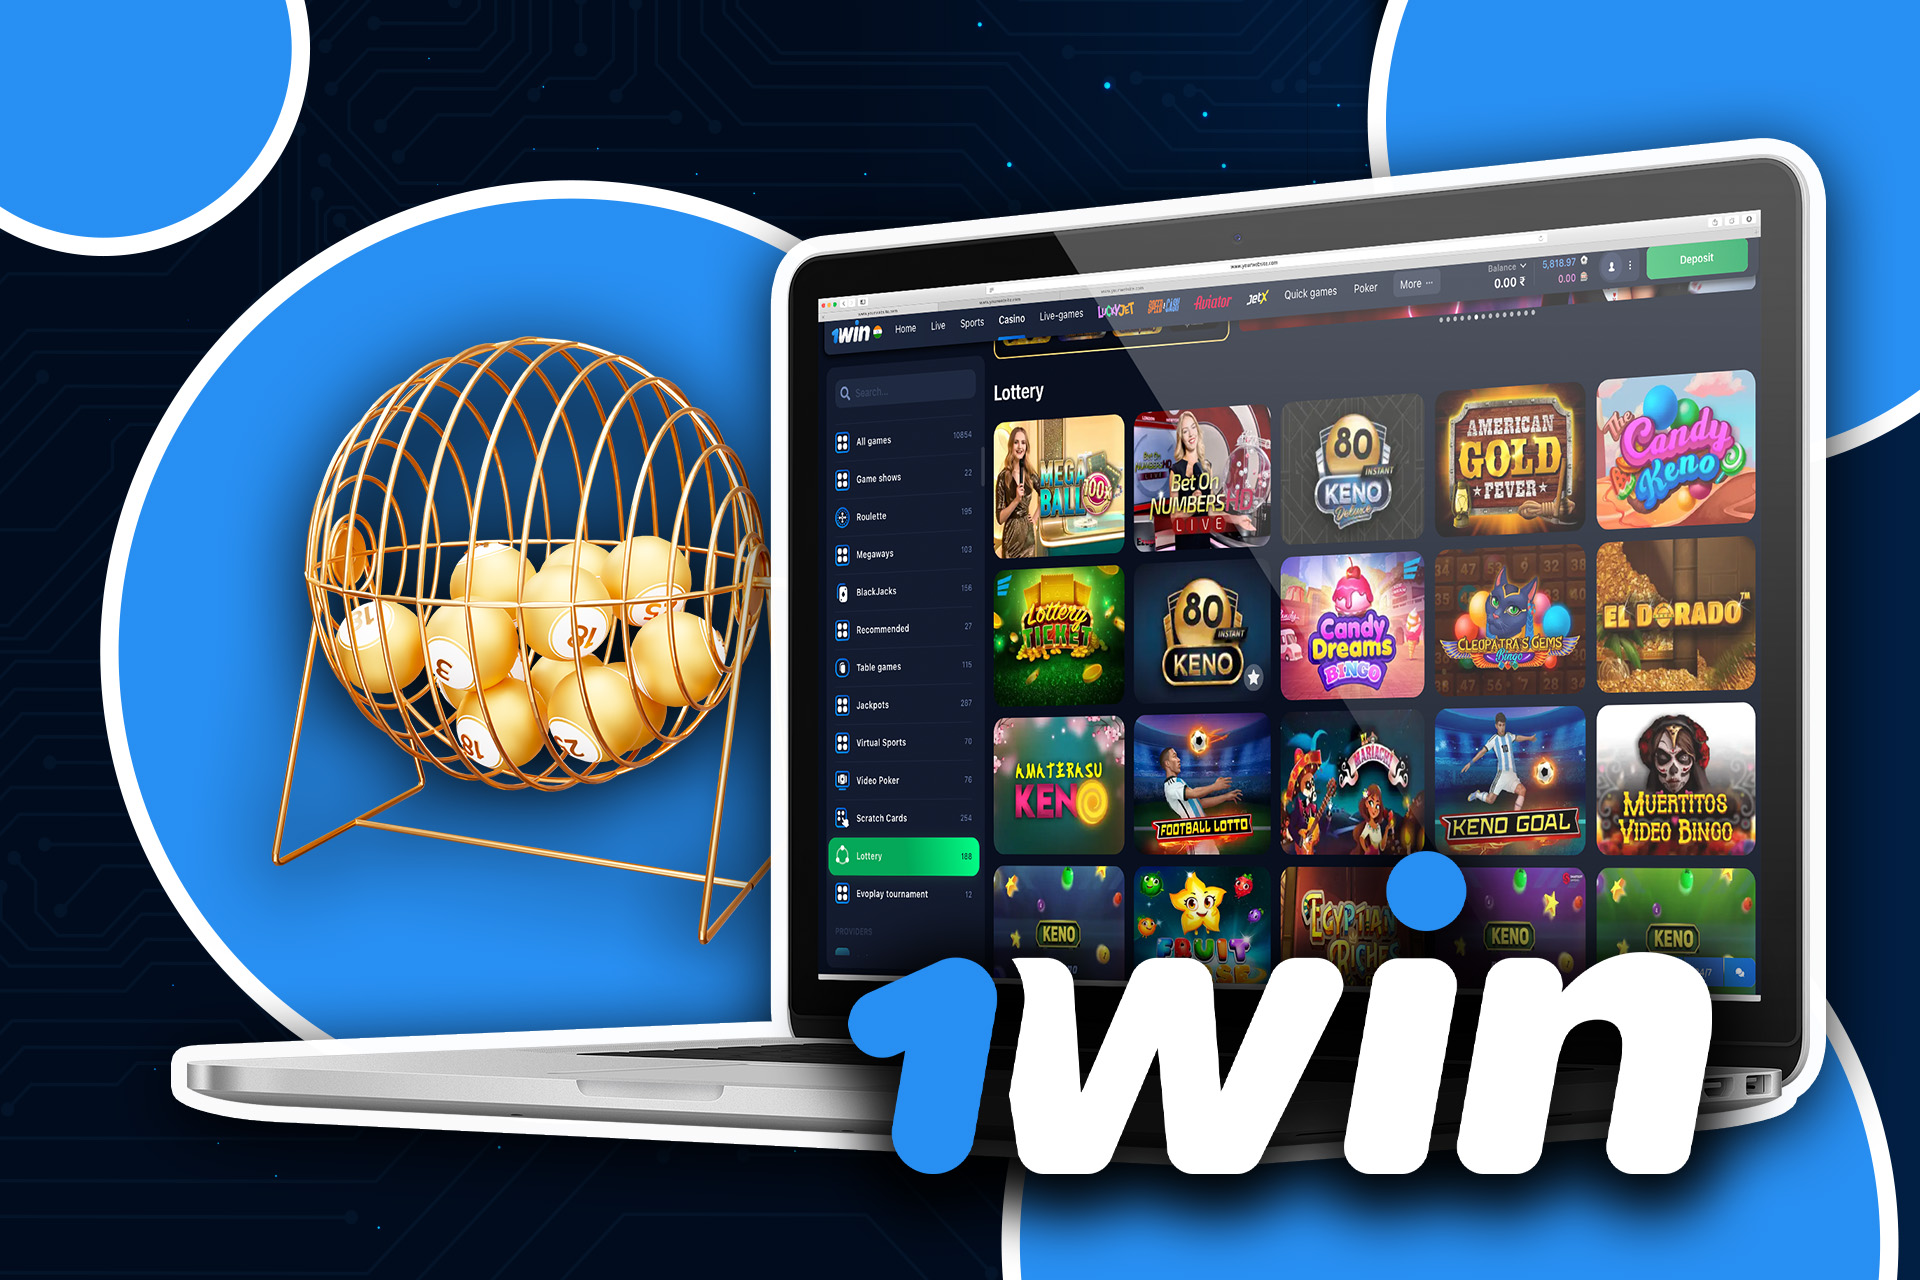 Test your luck with the 1win lotteries and try to win a jackpot.